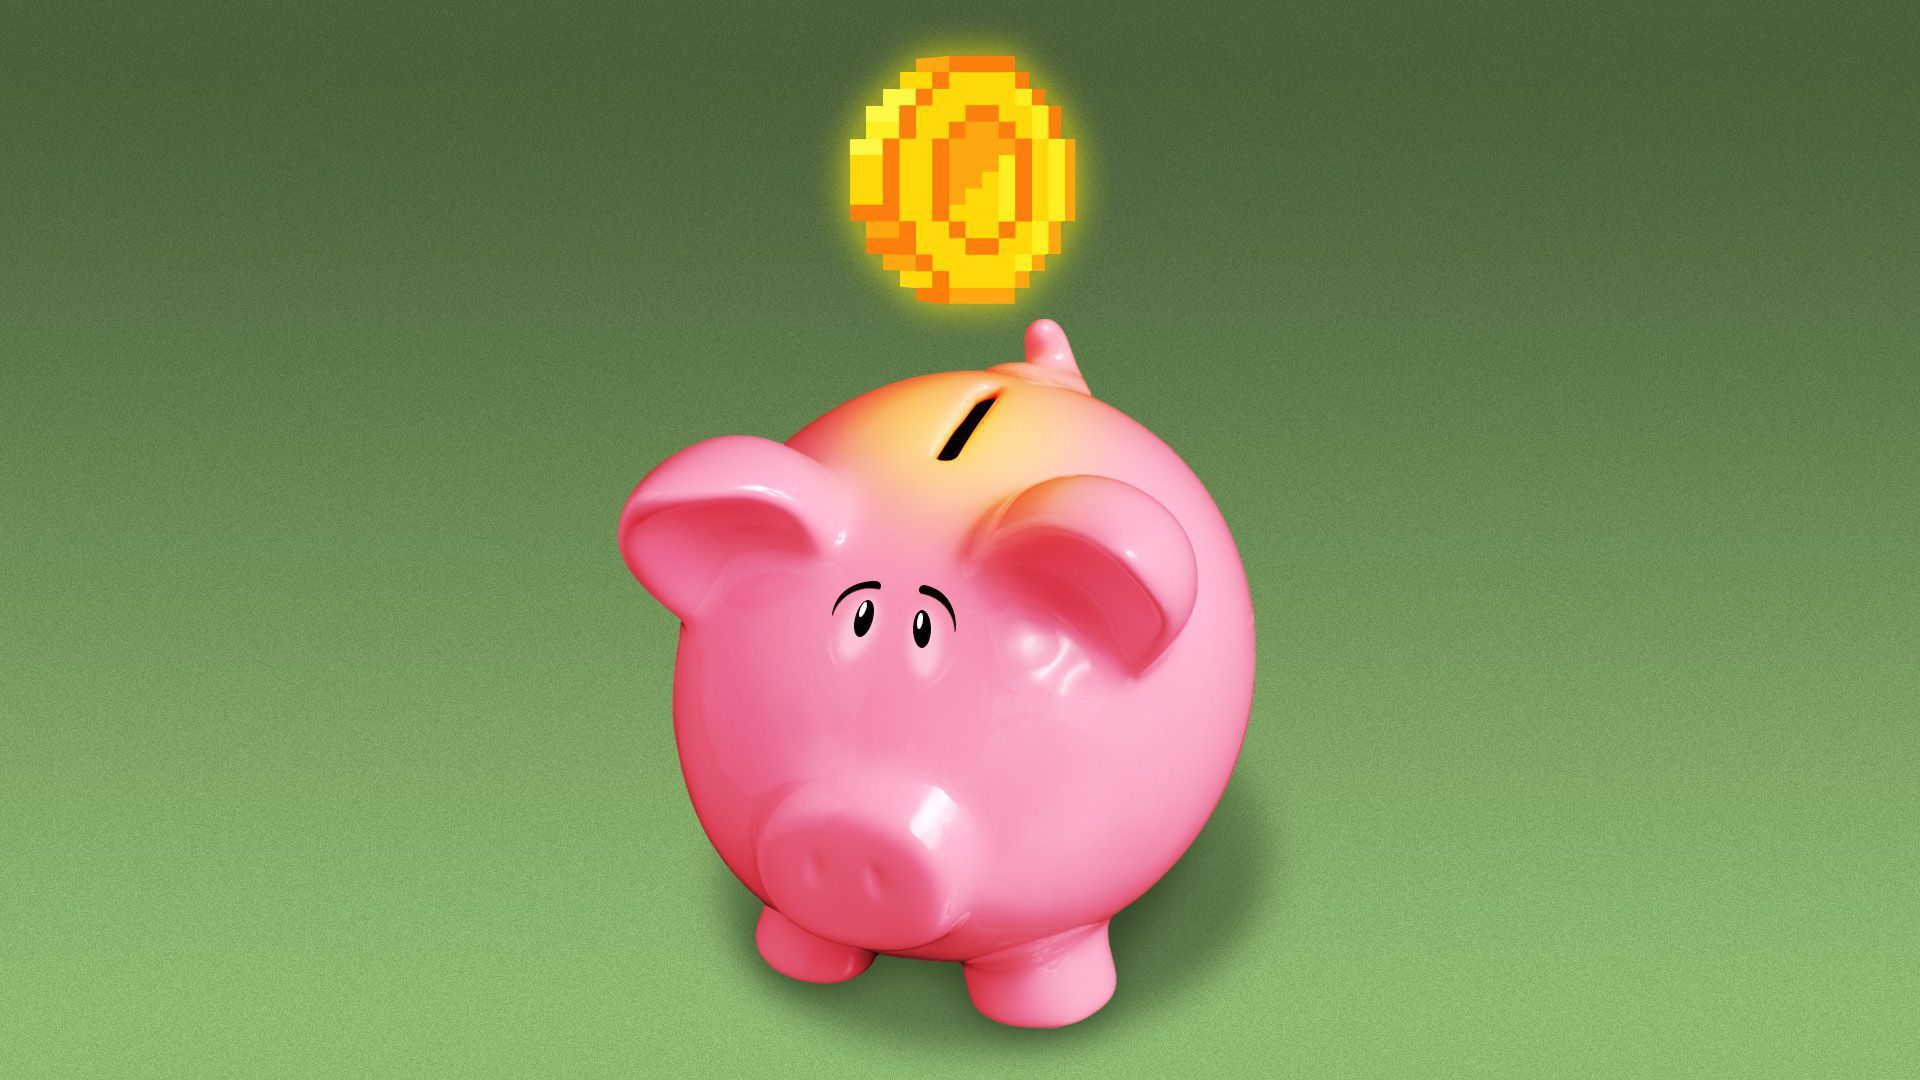 Illustration of a piggy bank with a digital coin floating above it.